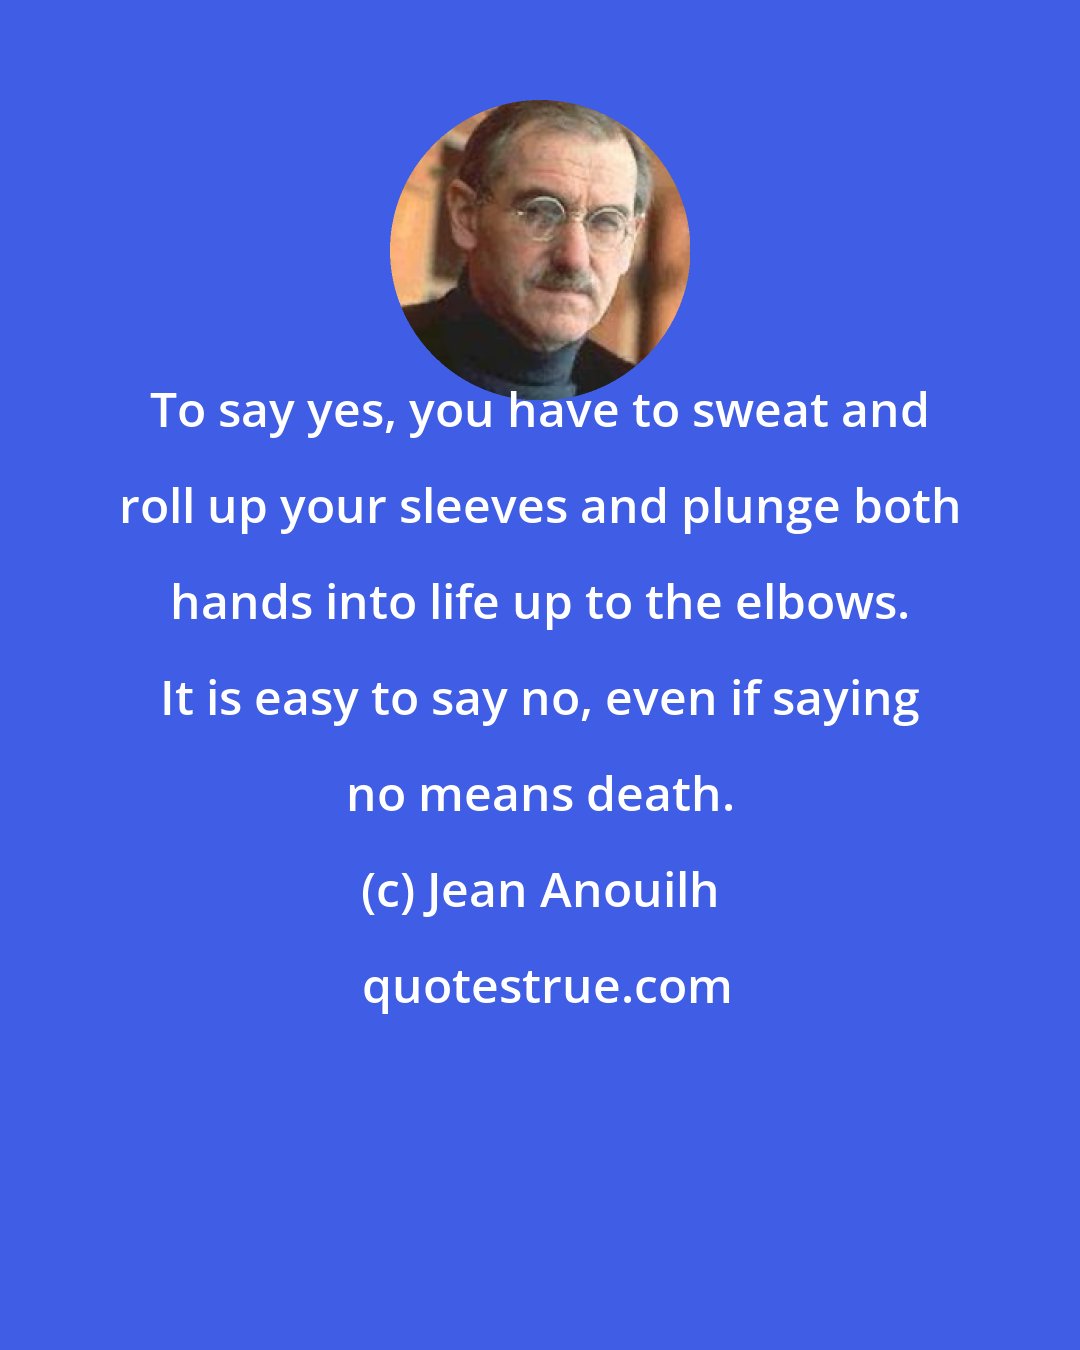 Jean Anouilh: To say yes, you have to sweat and roll up your sleeves and plunge both hands into life up to the elbows. It is easy to say no, even if saying no means death.